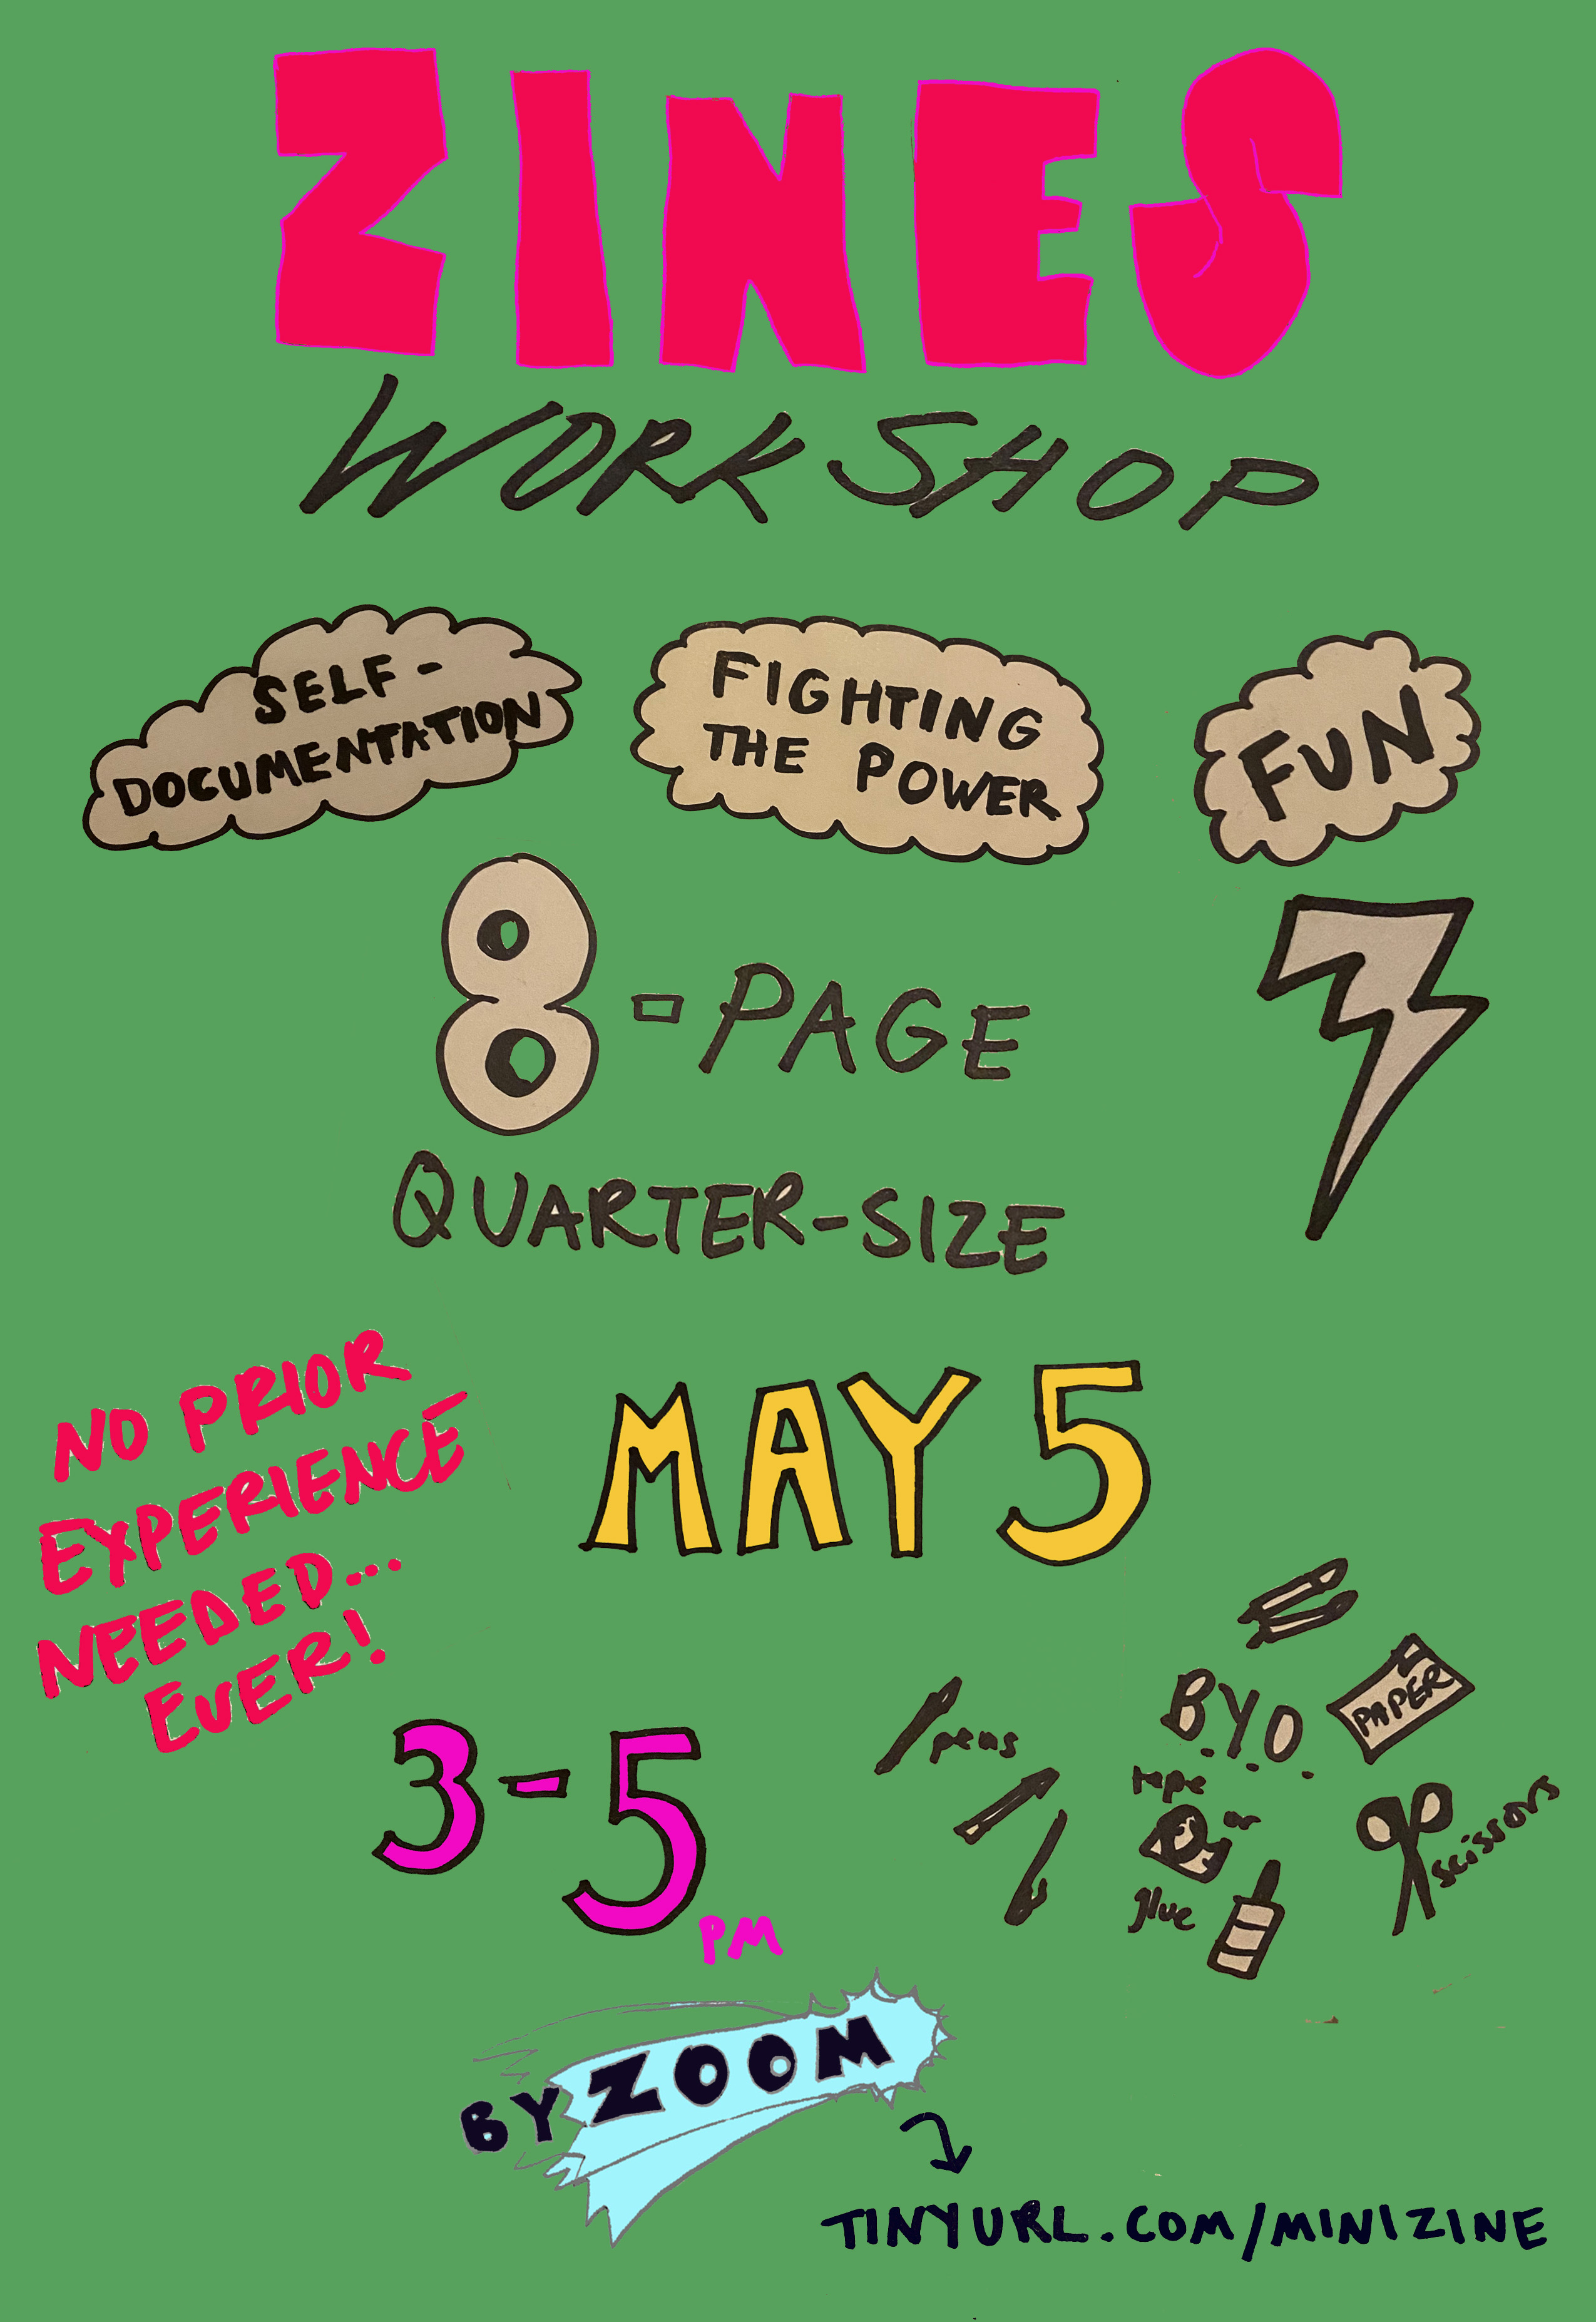 flier for zine workshop: green with drawings of office supplies. same content as event post.